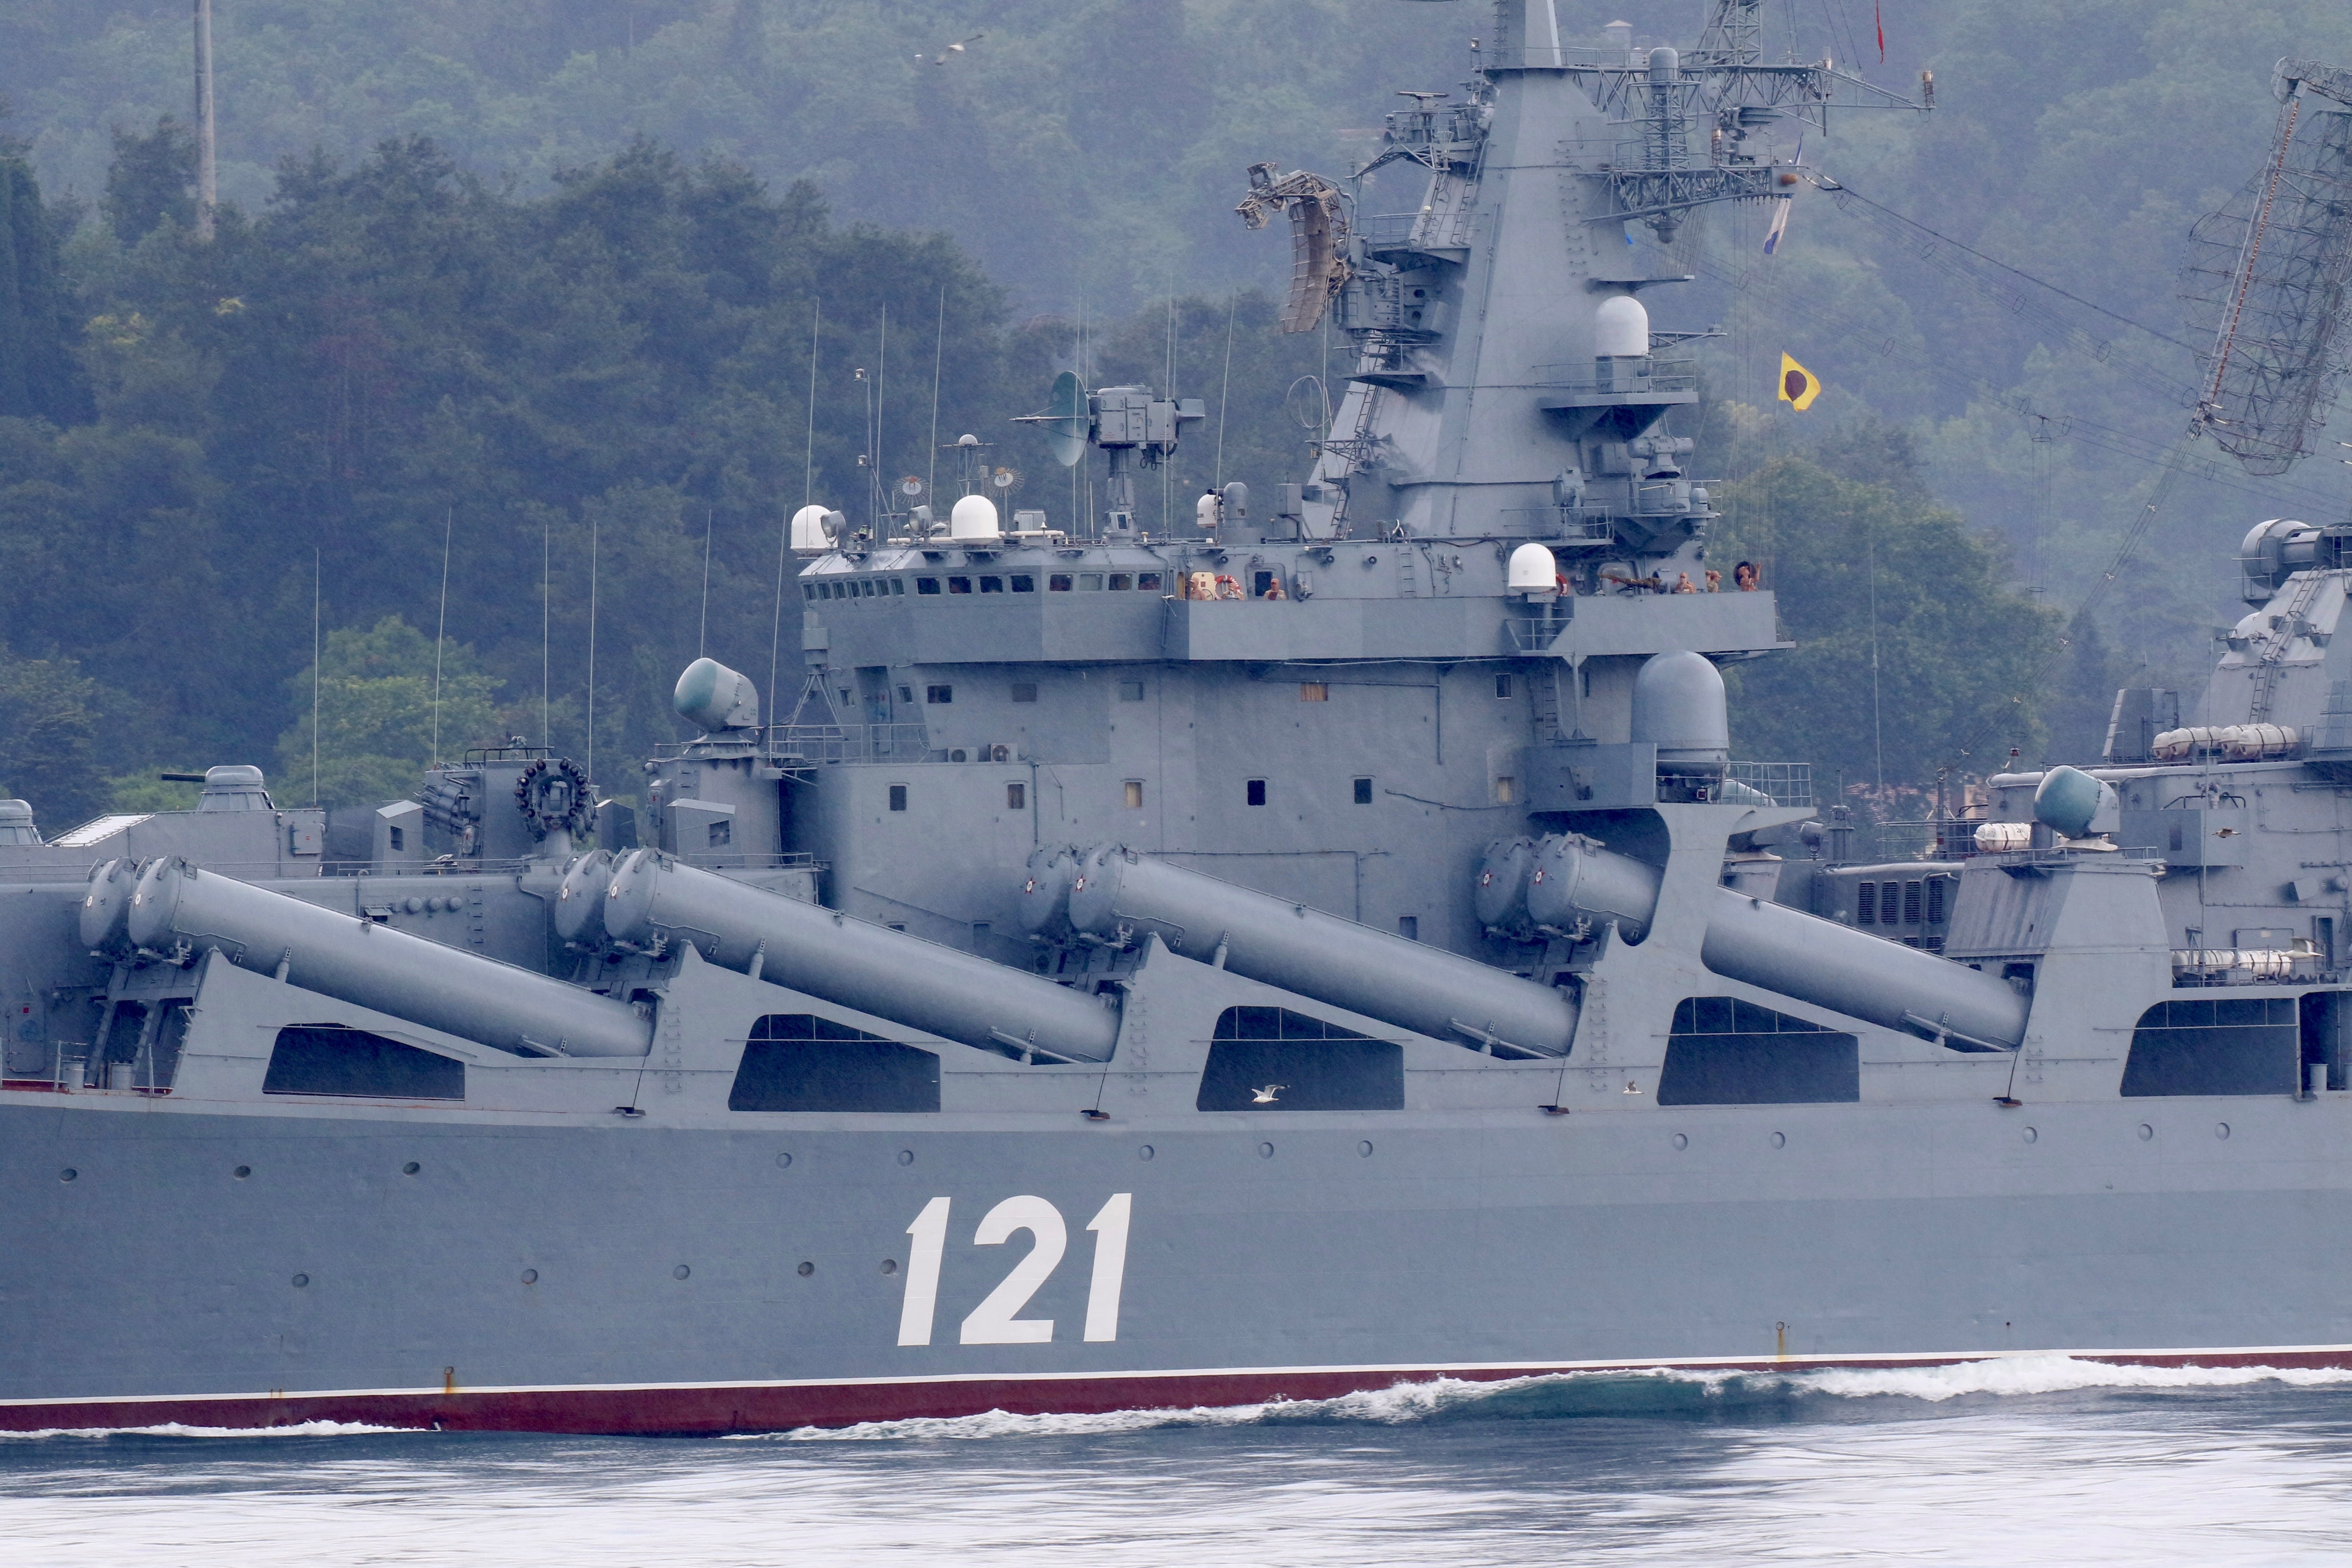 The Russian Navy’s guided missile cruiser Moskva seen last year near Turkey